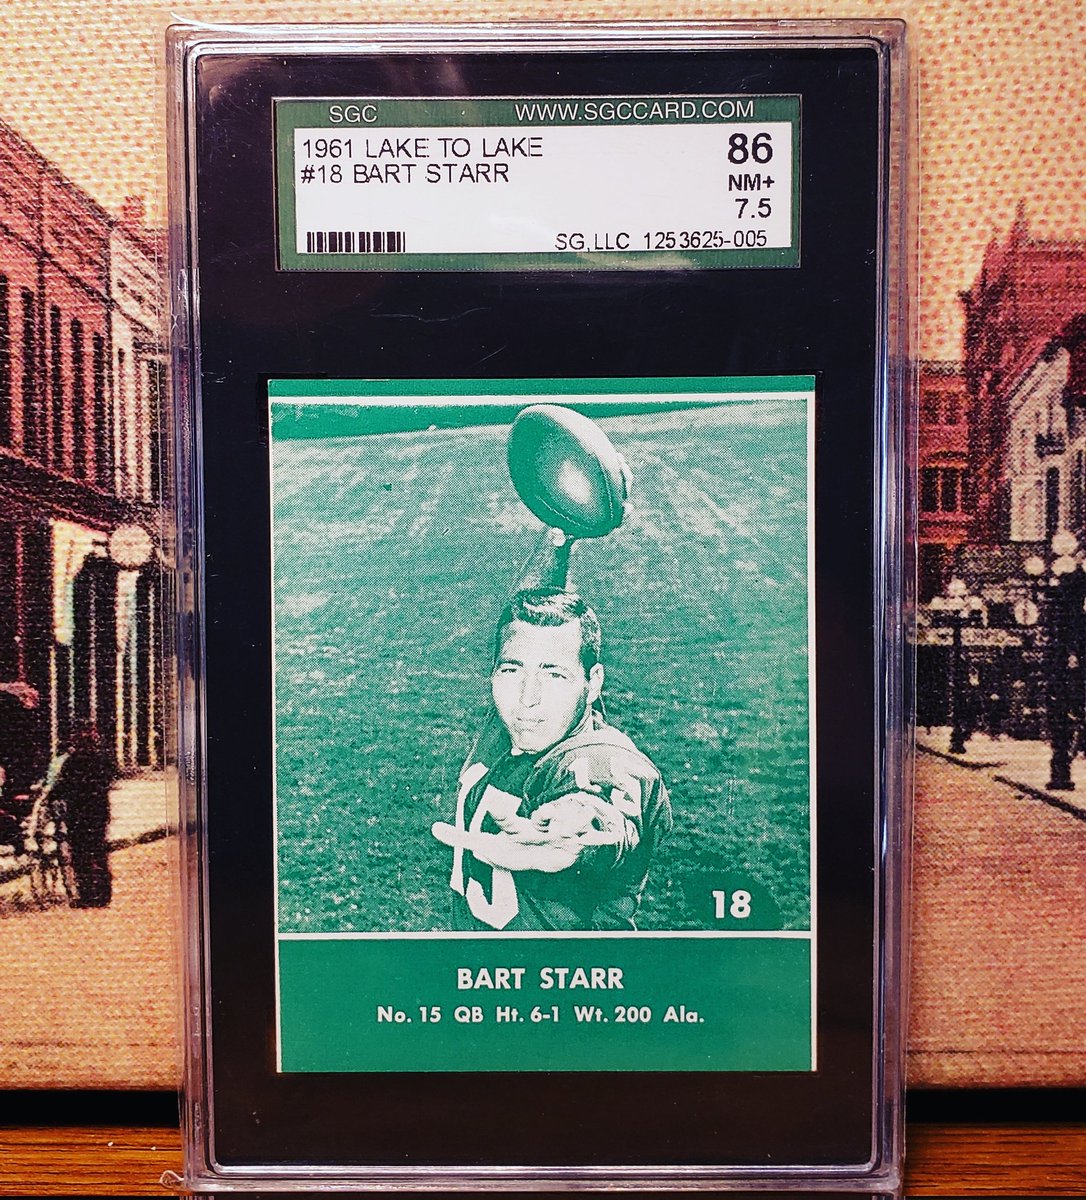 #45 on the Top 100 of 2023 - 1961 Lake to Lake Bart Starr SGC 7.5. Top graded SGC example. A beautiful SP I picked up a few years ago. Glad I did. One of my favorite cards! #bartstarr #greenbaypackers #laketolake #thehobby #sgcgrading #gosgc #vintagefootball #footballcards